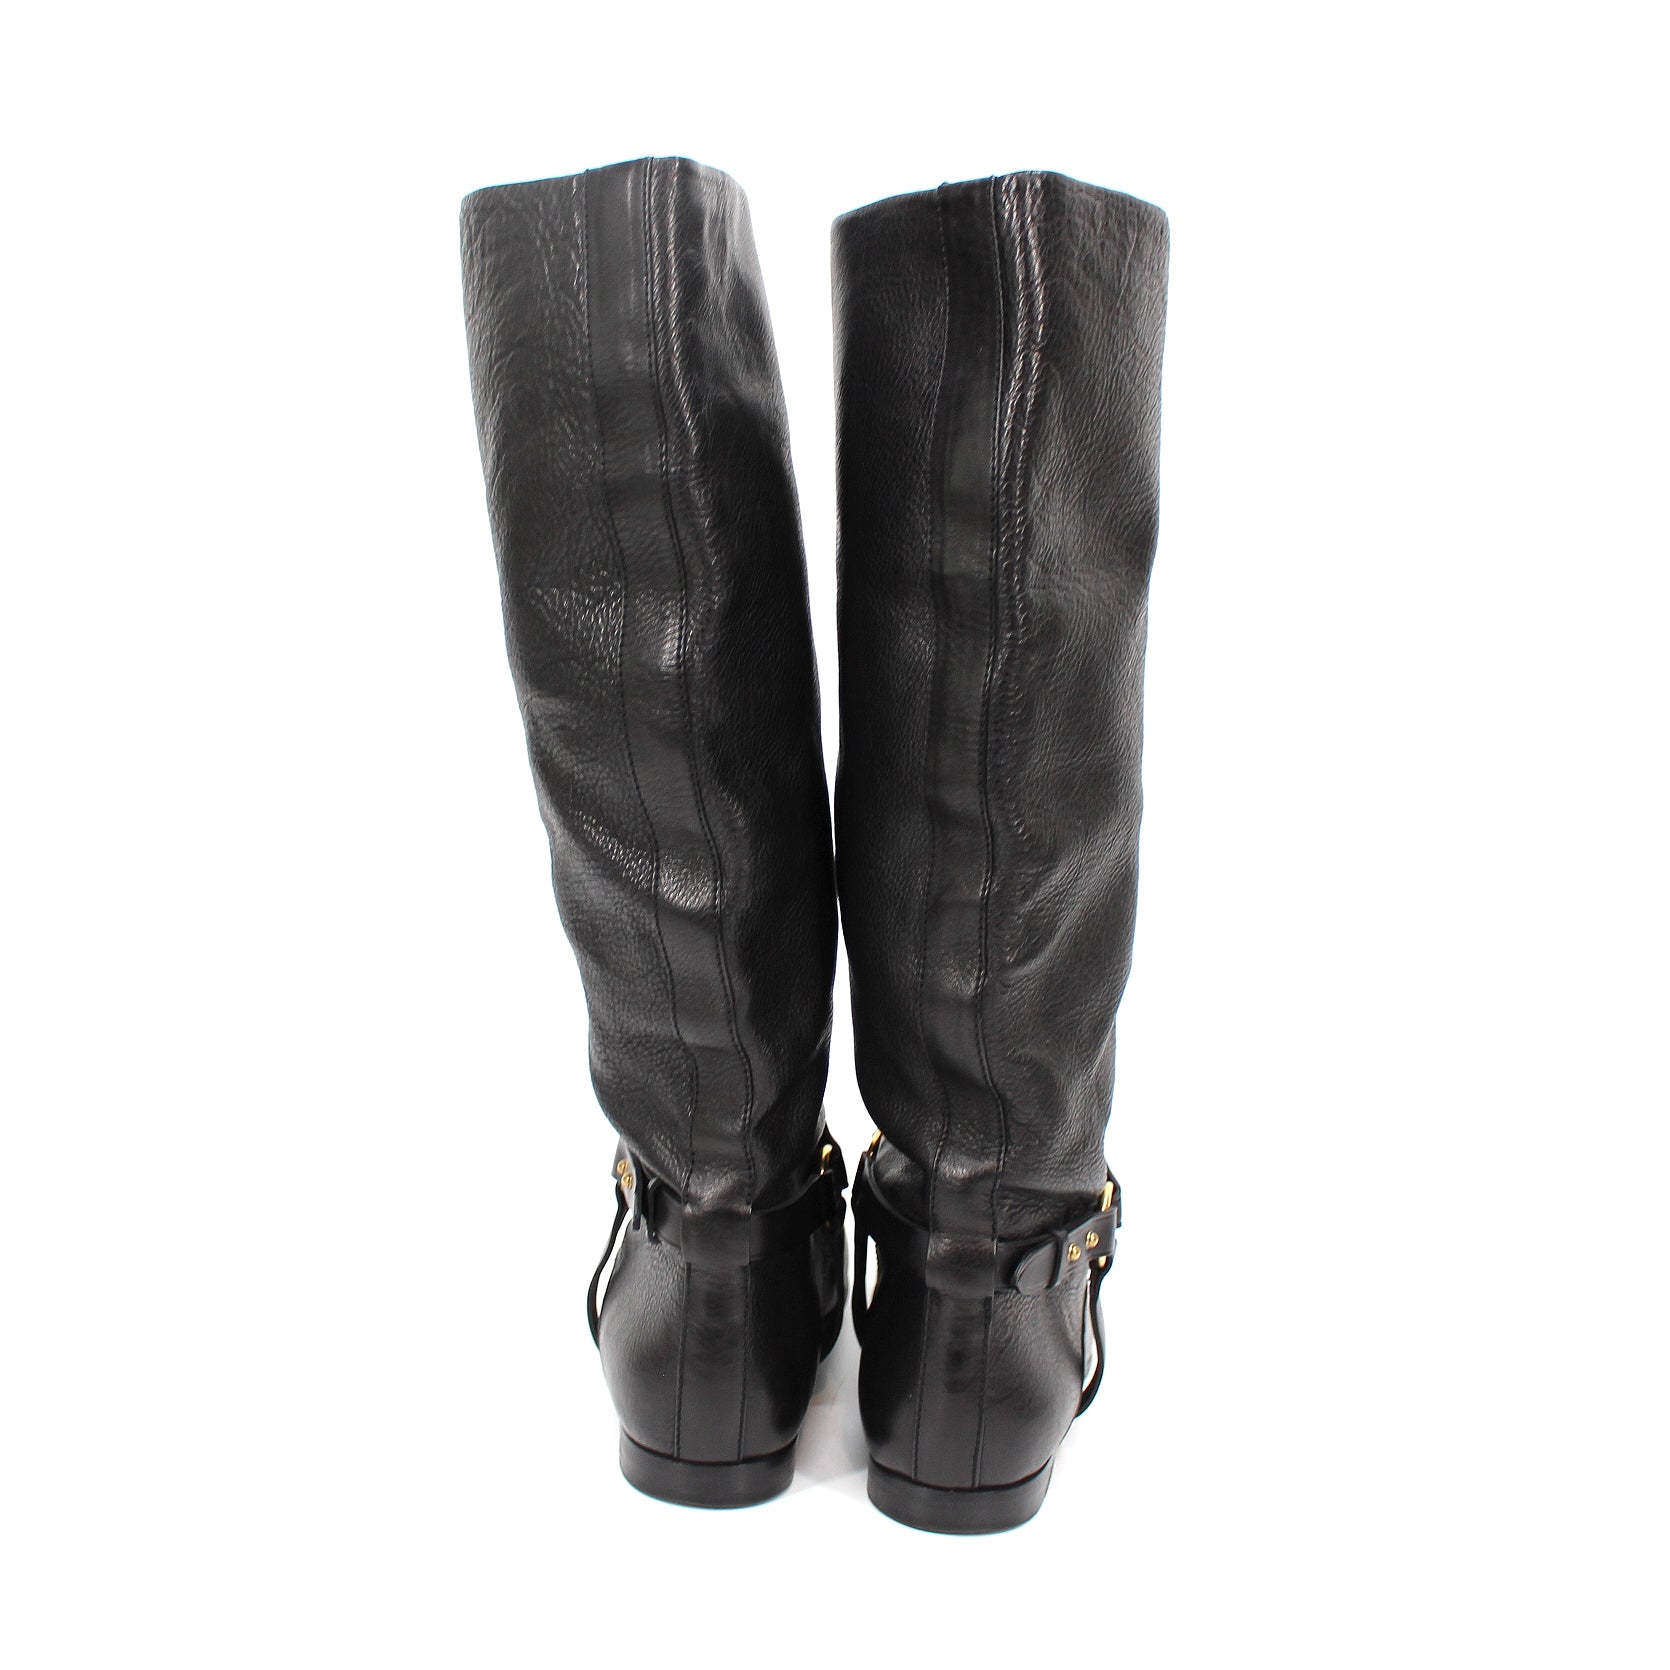 Gucci Black Embossed Emblem Equestrian Leather Riding Boots – The